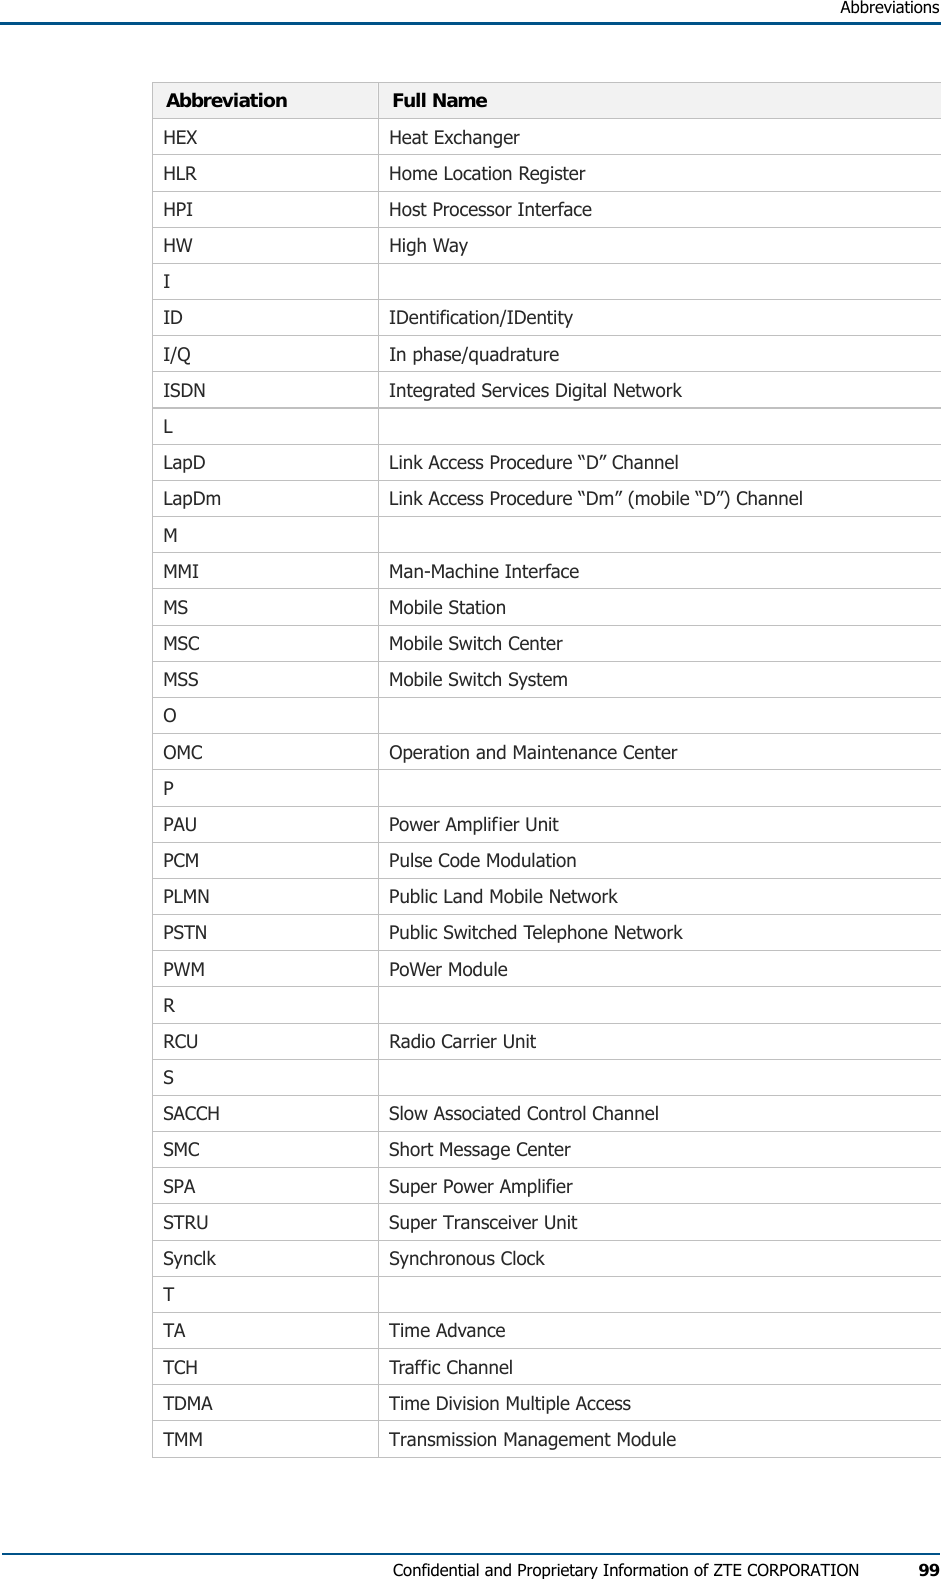   Abbreviations Confidential and Proprietary Information of ZTE CORPORATION 99 Abbreviation  Full Name HEX Heat Exchanger HLR  Home Location Register HPI  Host Processor Interface HW High Way I  ID IDentification/IDentity I/Q In phase/quadrature ISDN  Integrated Services Digital Network L  LapD  Link Access Procedure “D” Channel LapDm  Link Access Procedure “Dm” (mobile “D”) Channel M  MMI Man-Machine Interface MS Mobile Station MSC  Mobile Switch Center MSS  Mobile Switch System O  OMC  Operation and Maintenance Center P  PAU  Power Amplifier Unit PCM  Pulse Code Modulation PLMN  Public Land Mobile Network PSTN  Public Switched Telephone Network PWM PoWer Module R  RCU  Radio Carrier Unit S  SACCH  Slow Associated Control Channel SMC  Short Message Center SPA  Super Power Amplifier STRU  Super Transceiver Unit Synclk Synchronous Clock T  TA Time Advance TCH Traffic Channel TDMA  Time Division Multiple Access TMM  Transmission Management Module 